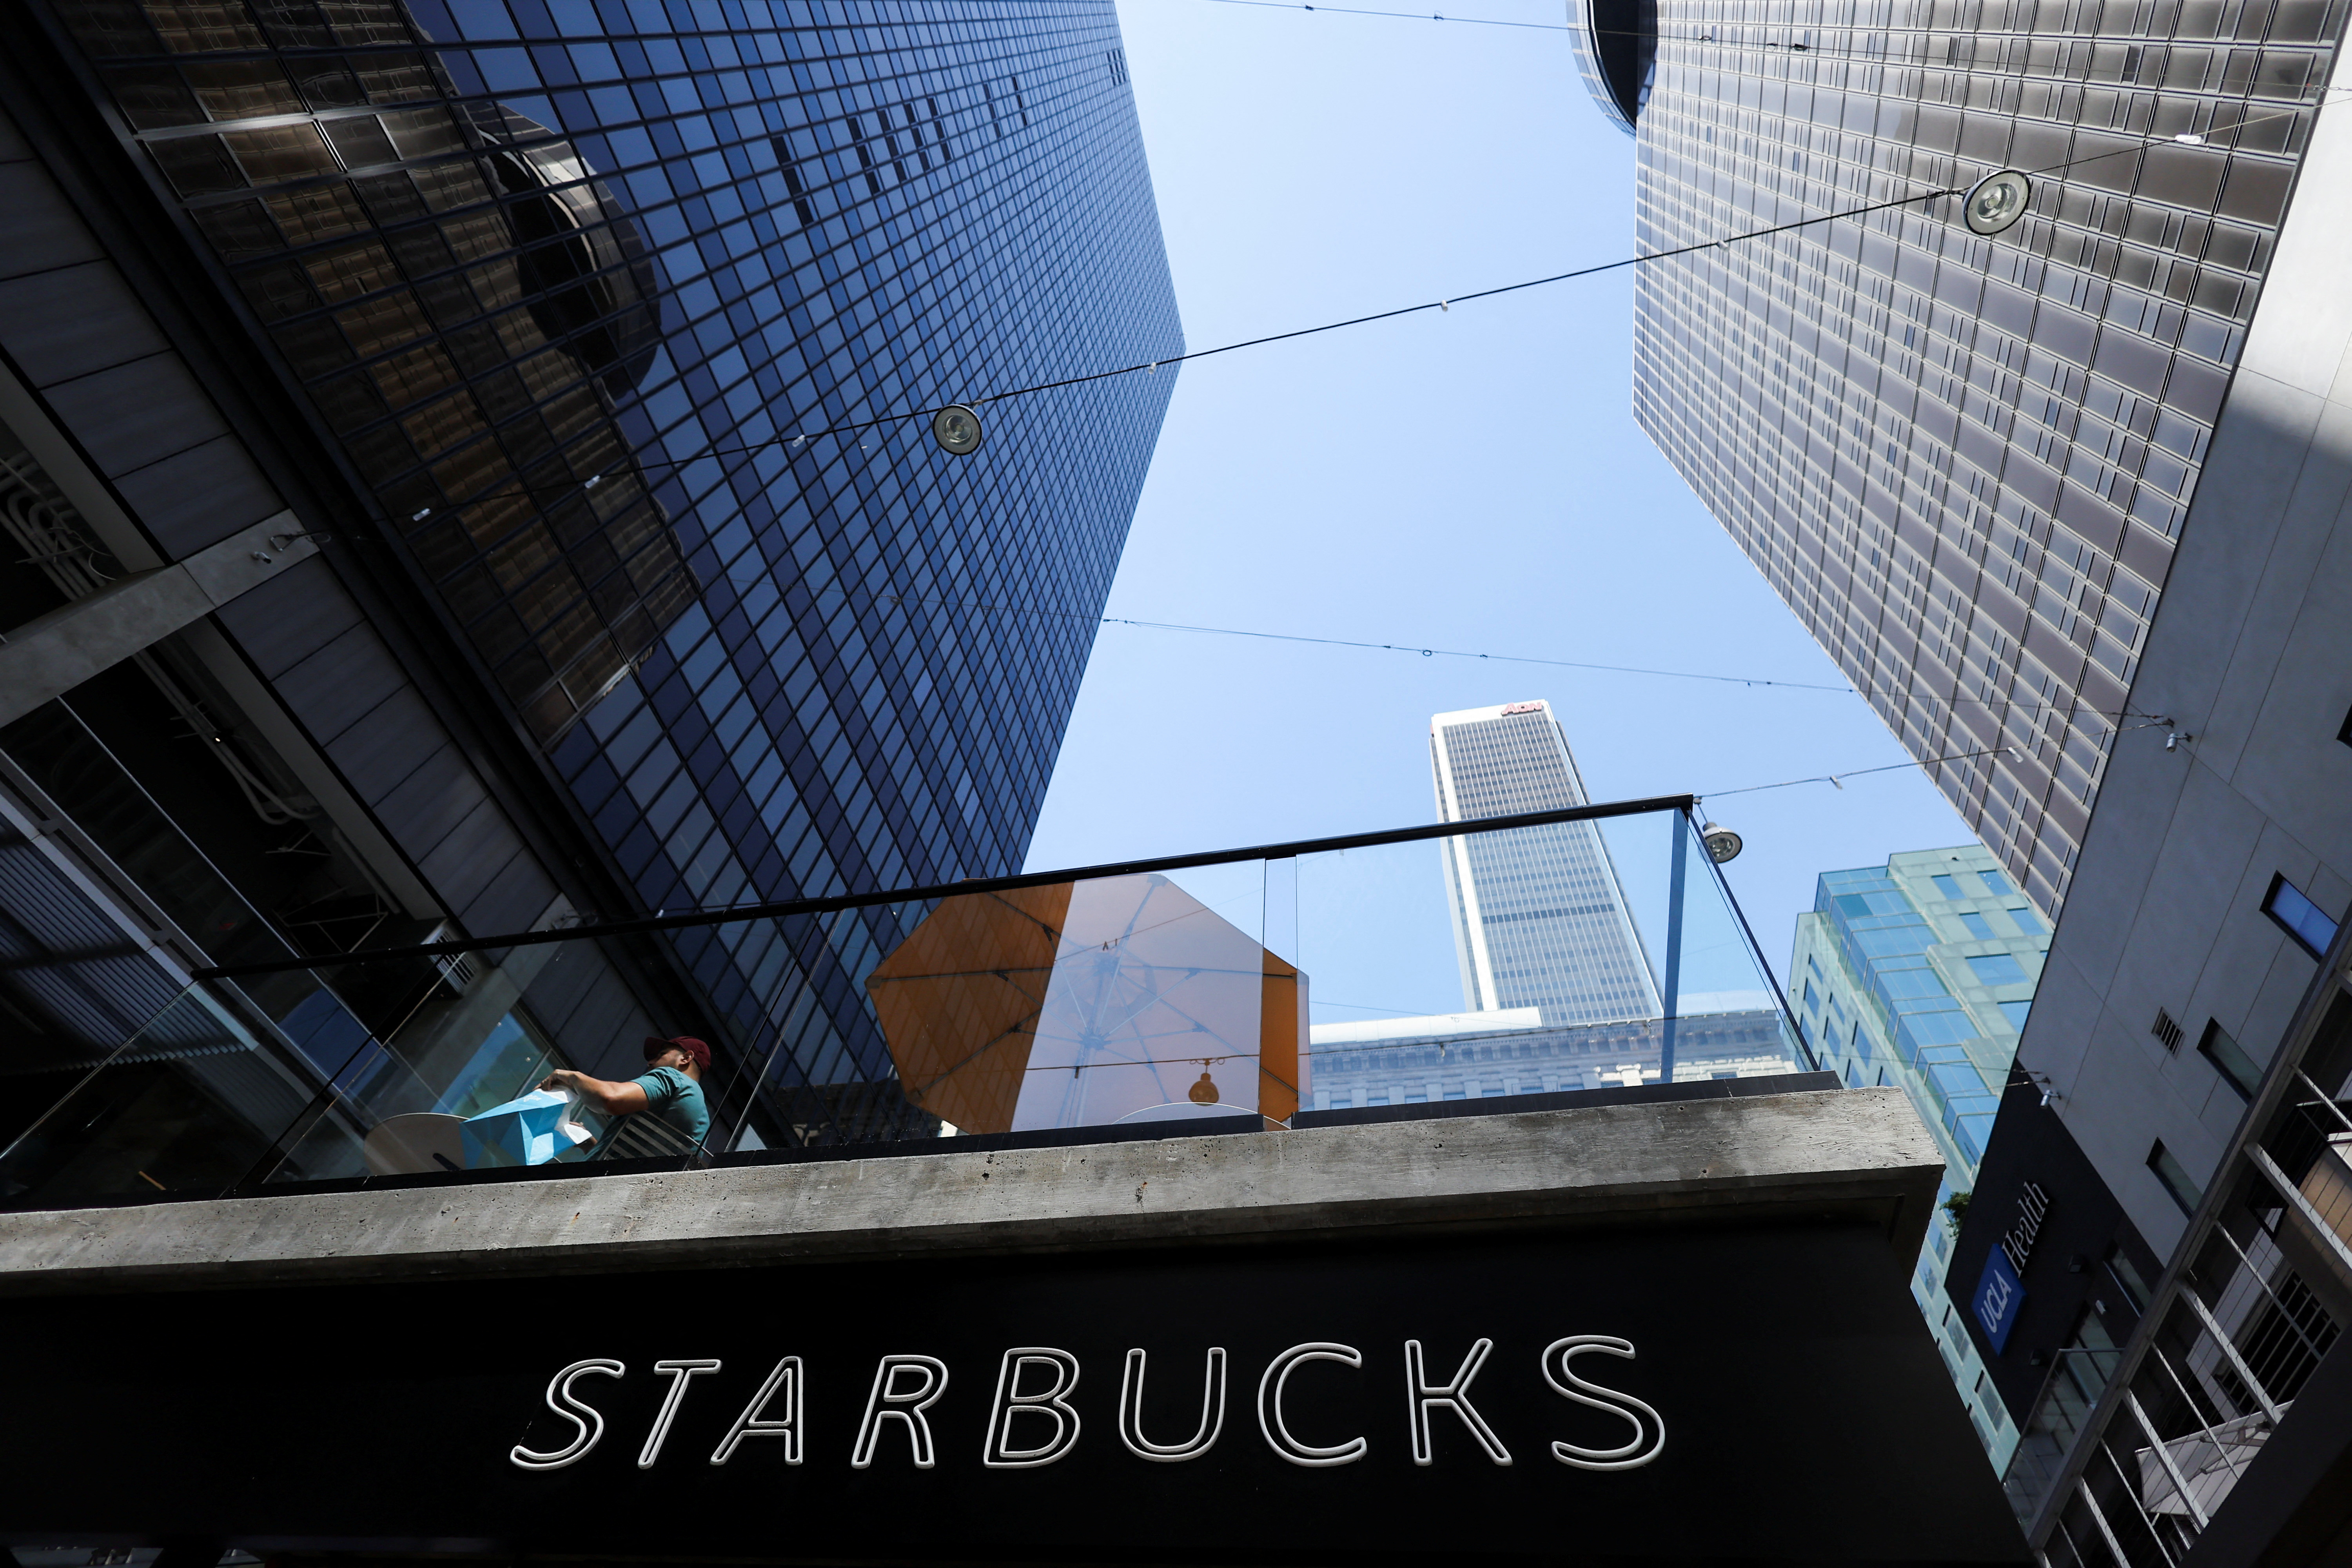 Conservative Think Tank Sues Starbucks Executives, Directors Over Diversity Policies